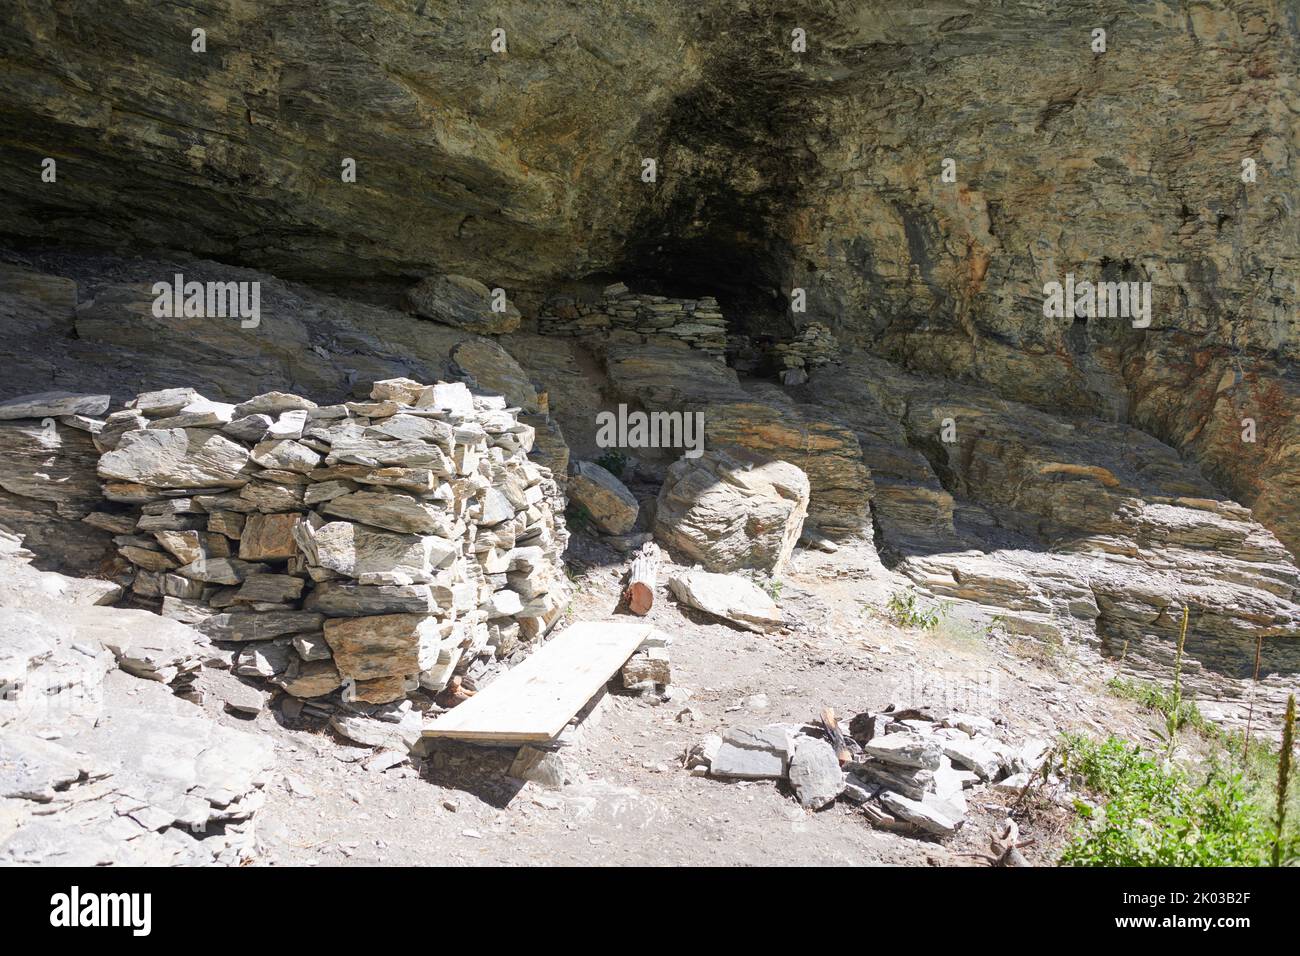 Emergency shelter in the mountains Stock Photo